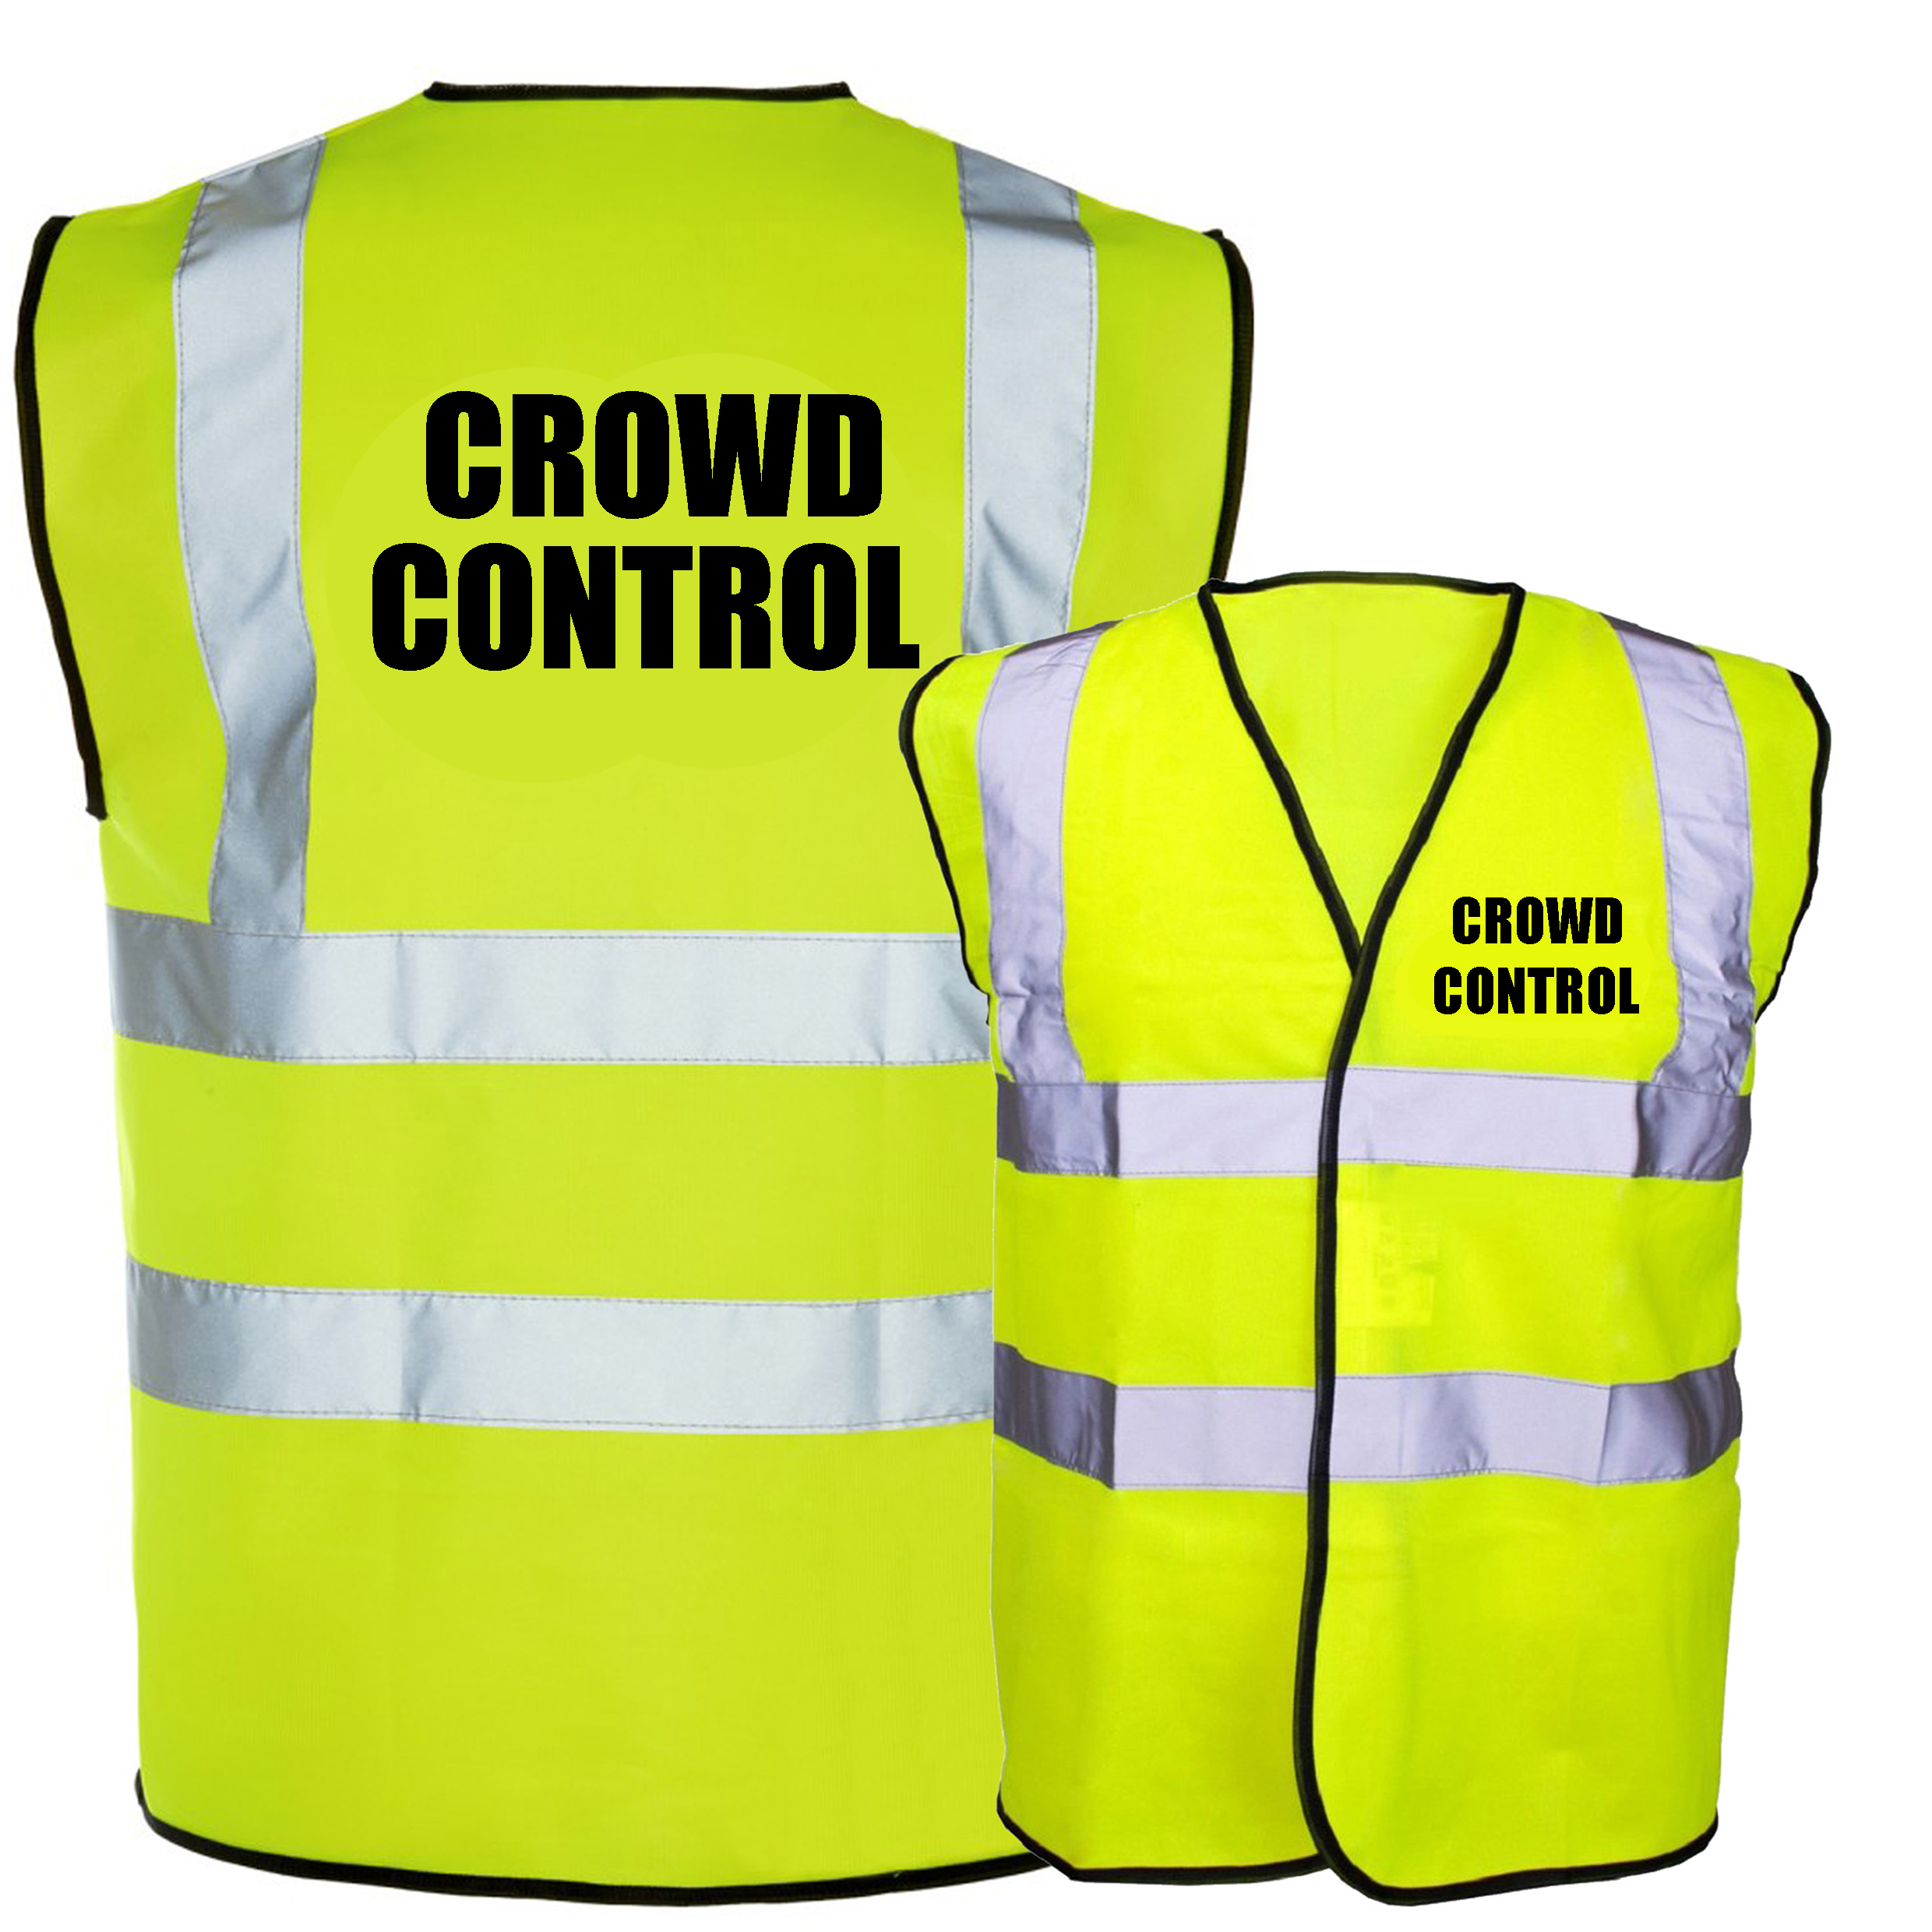 https://simplyhivisclothing.co.uk/wp-content/uploads/2019/11/crowd-control.jpg